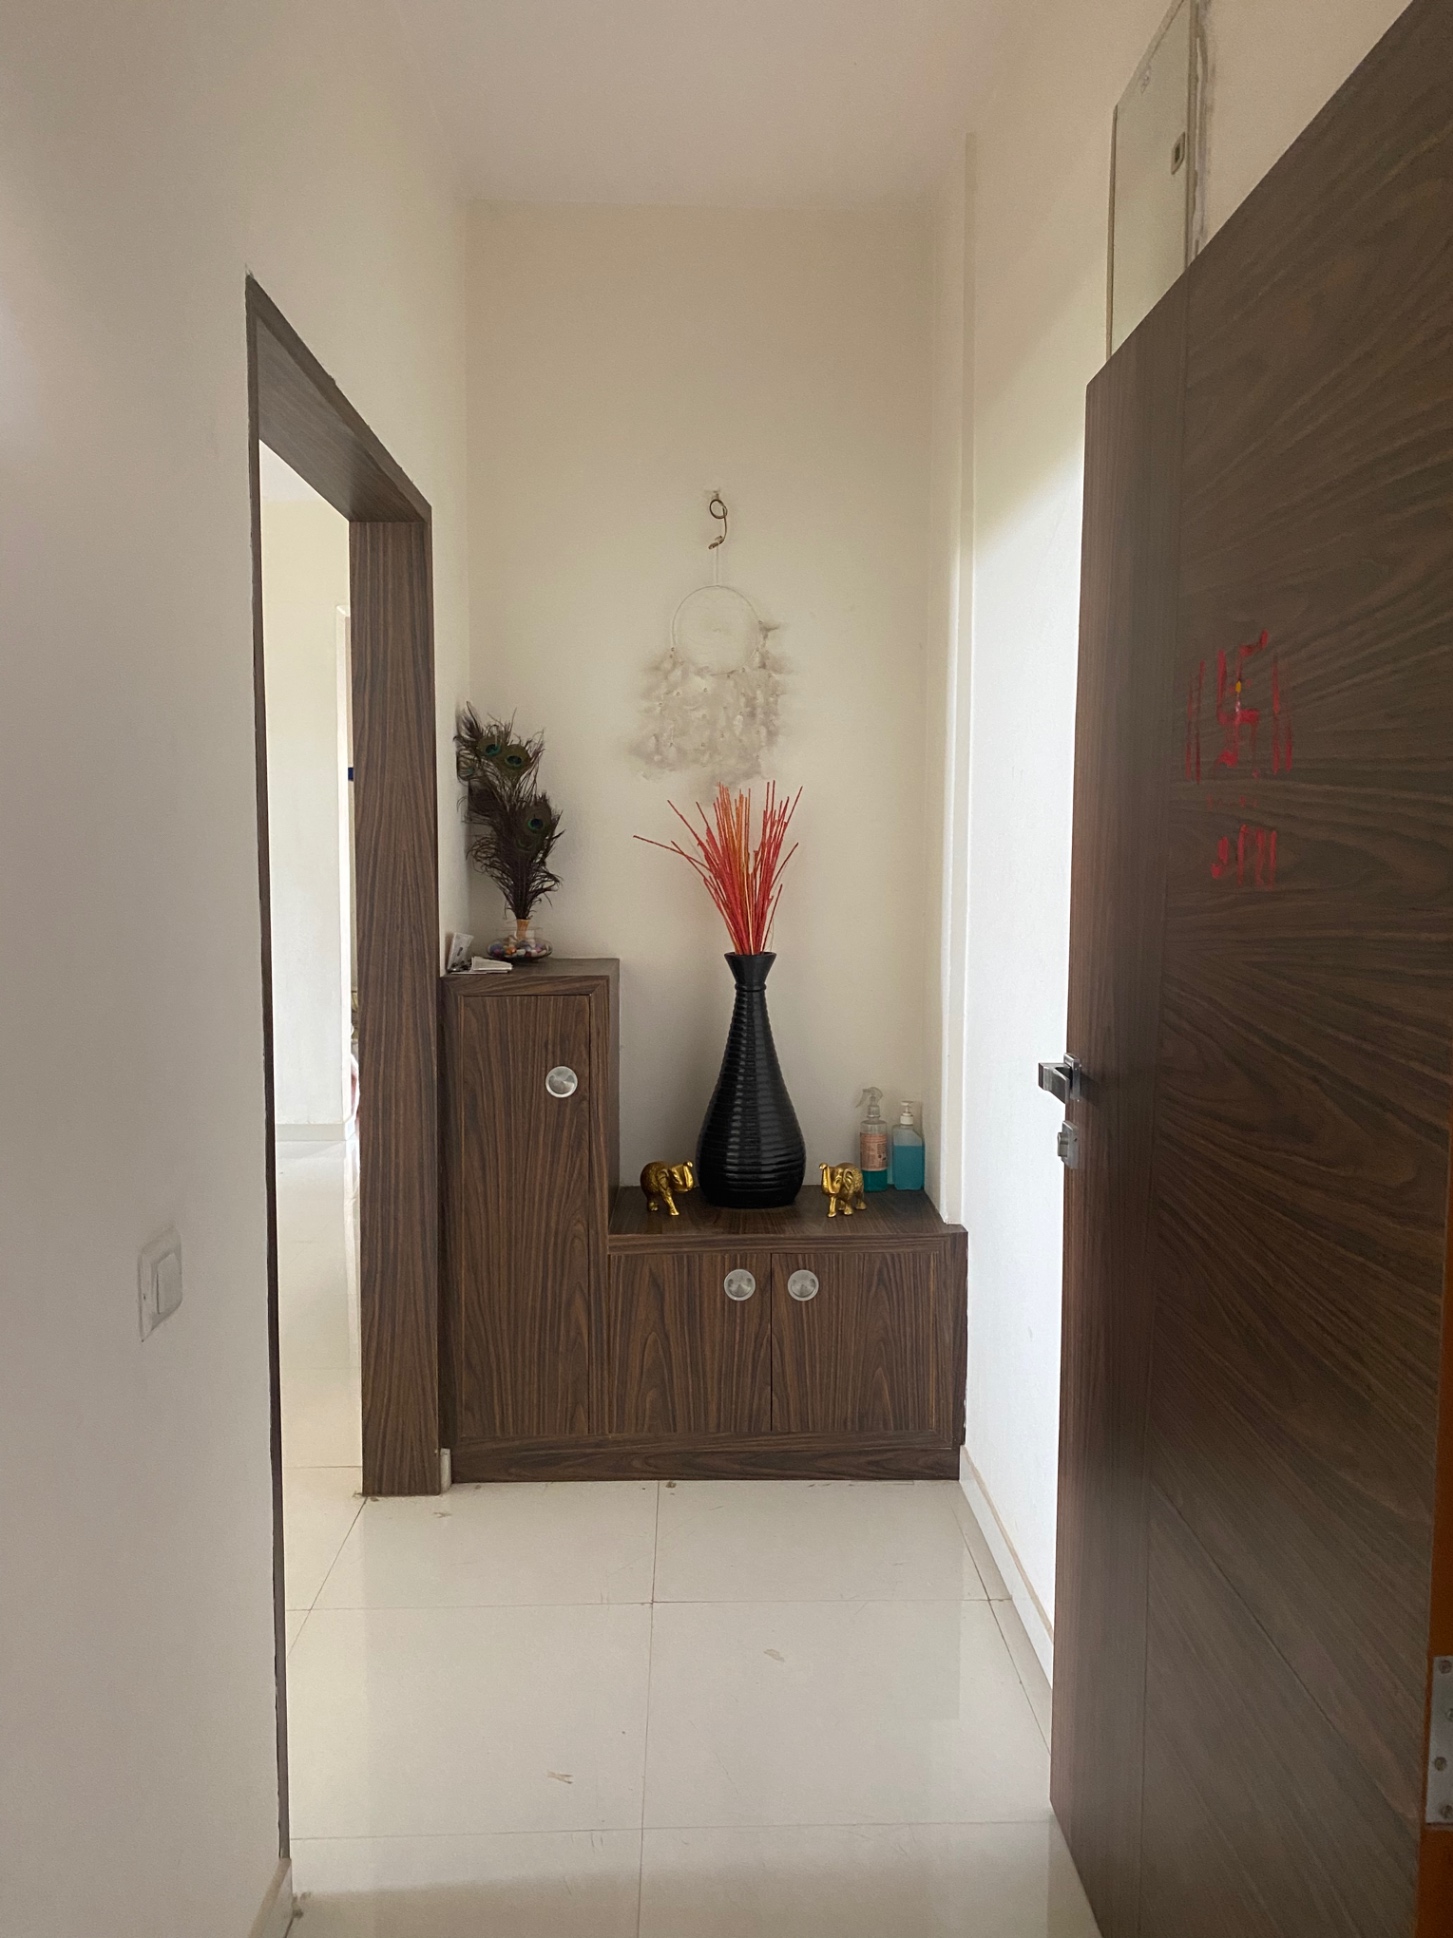 3 Bed/ 3 Bath Rent Apartment/ Flat; 2,300 sq. ft. carpet area, Semi Furnished for rent